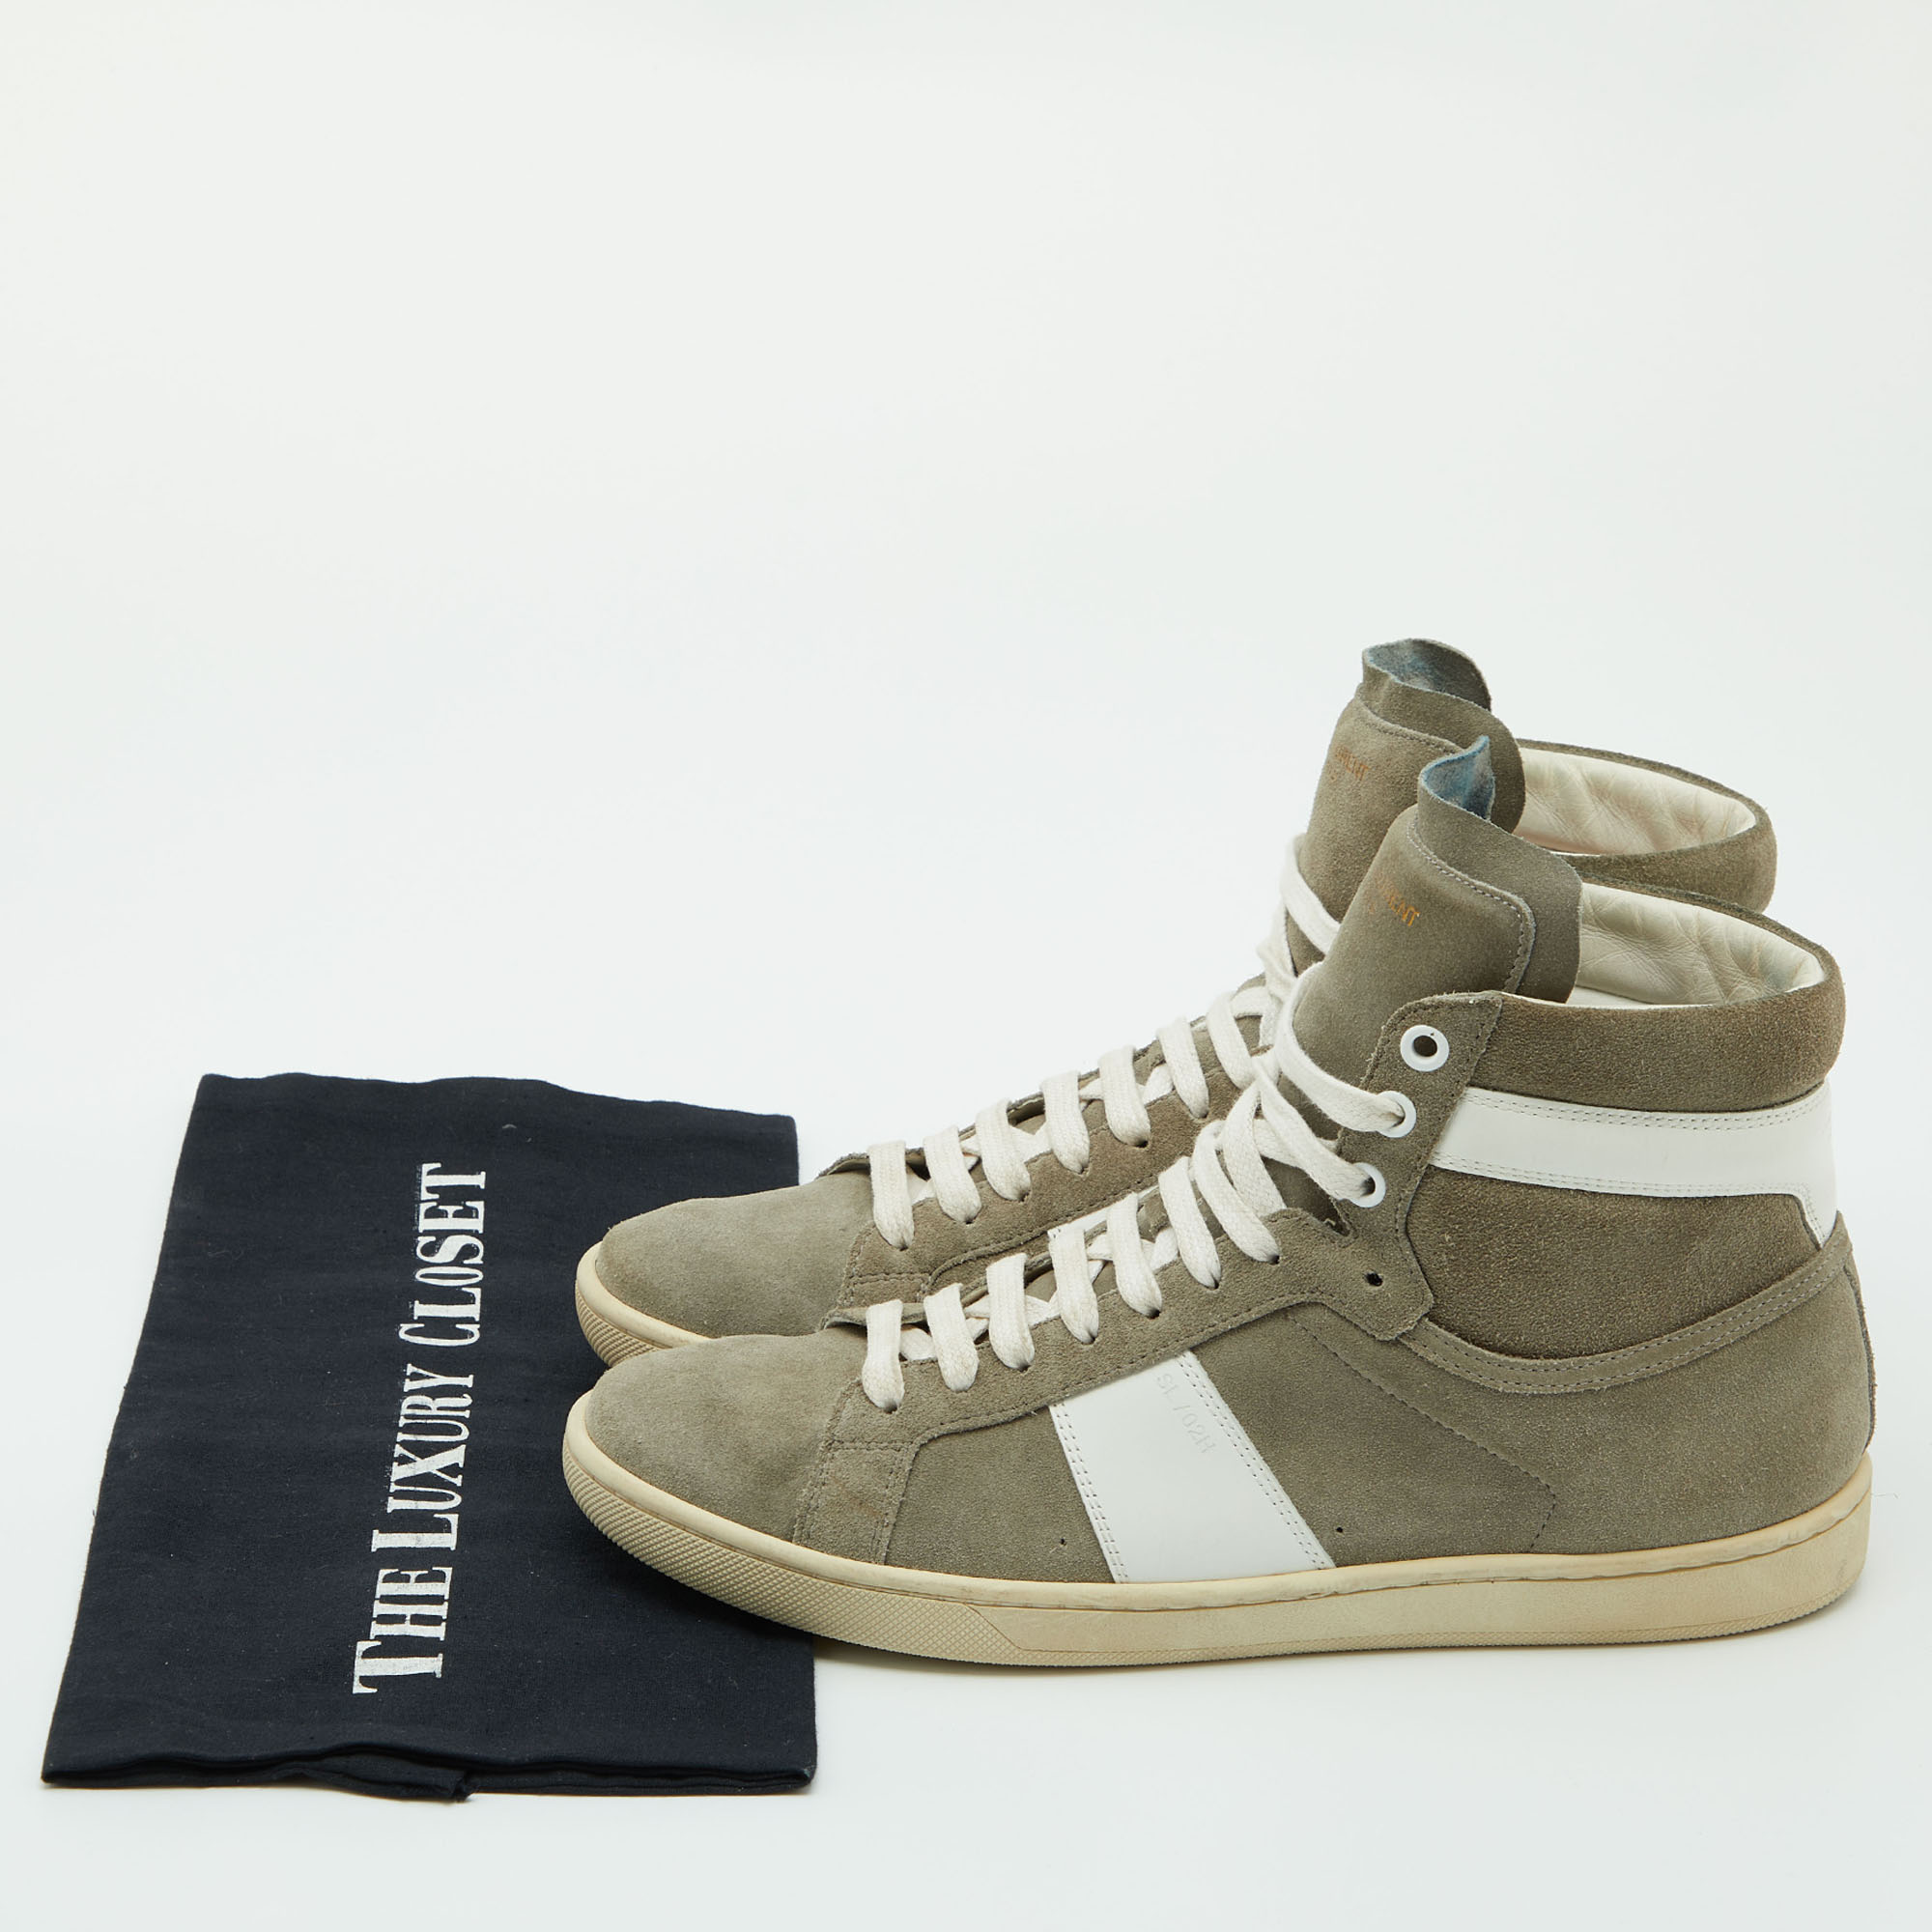 Saint Laurent Grey/White Suede And Leather High Top Sneakers Size 39